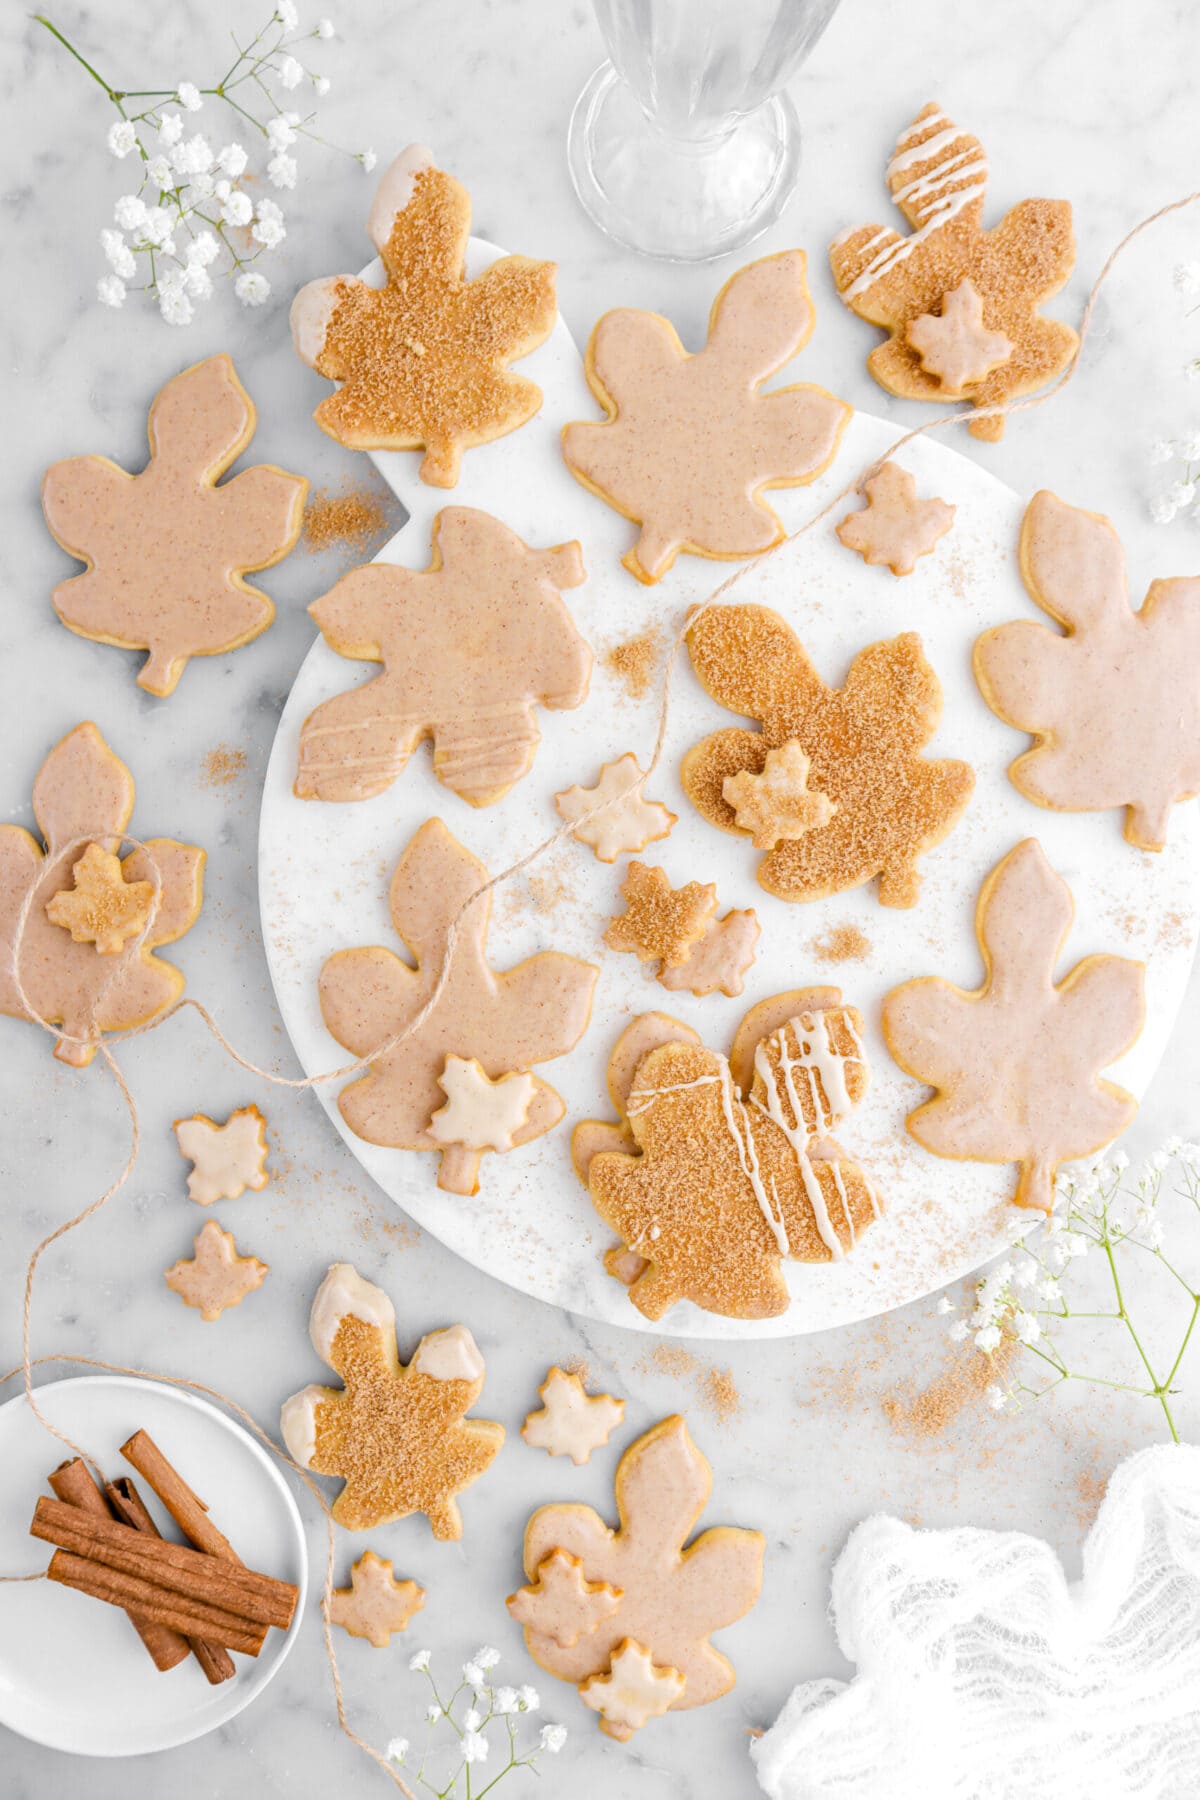 cropped image of iced maple leaf cookies on marble tray with white flowers, cinnamon sugar, and cinnamon sticks around.